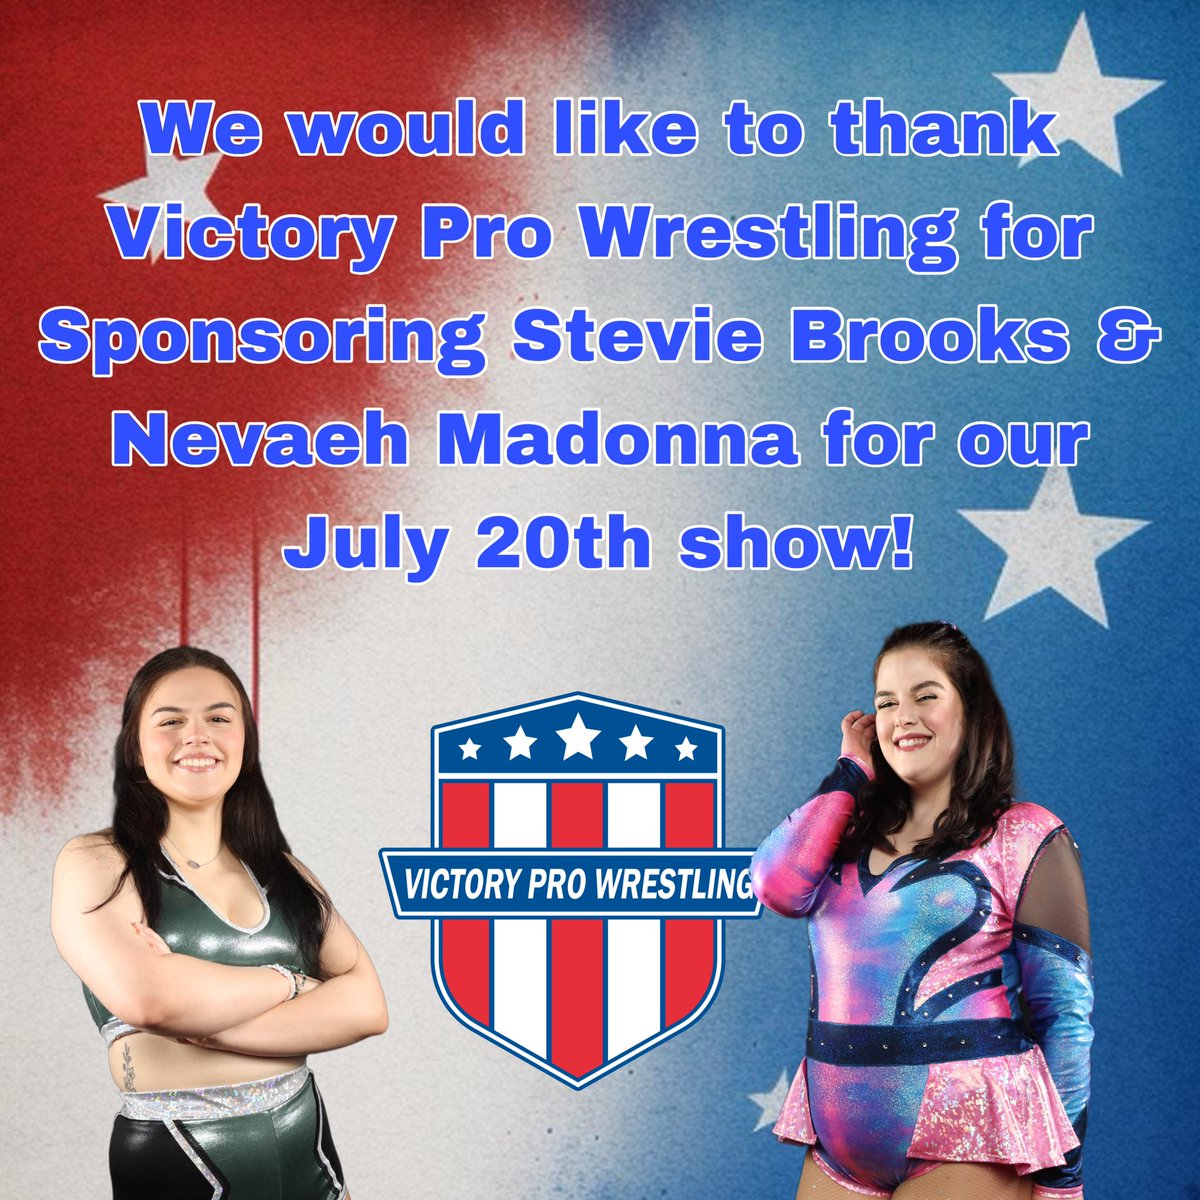 Thank you to Victory Pro Wrestling for sponsoring Nevaeh Madonna & Stevie Brooks for July 20th!